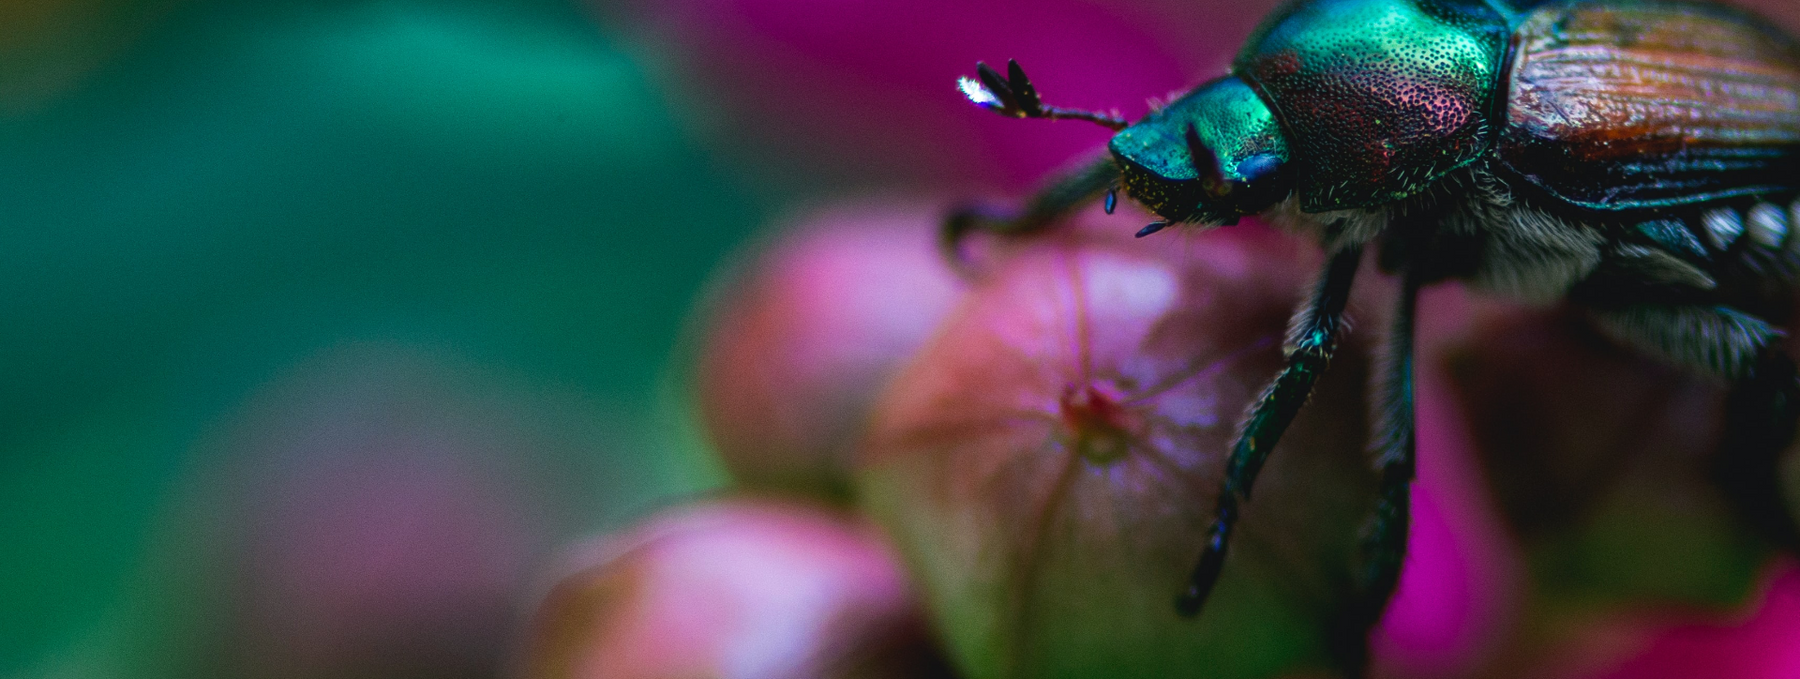 Close-up image of an iridescent beetle sitting on a small pink and purple flower. 